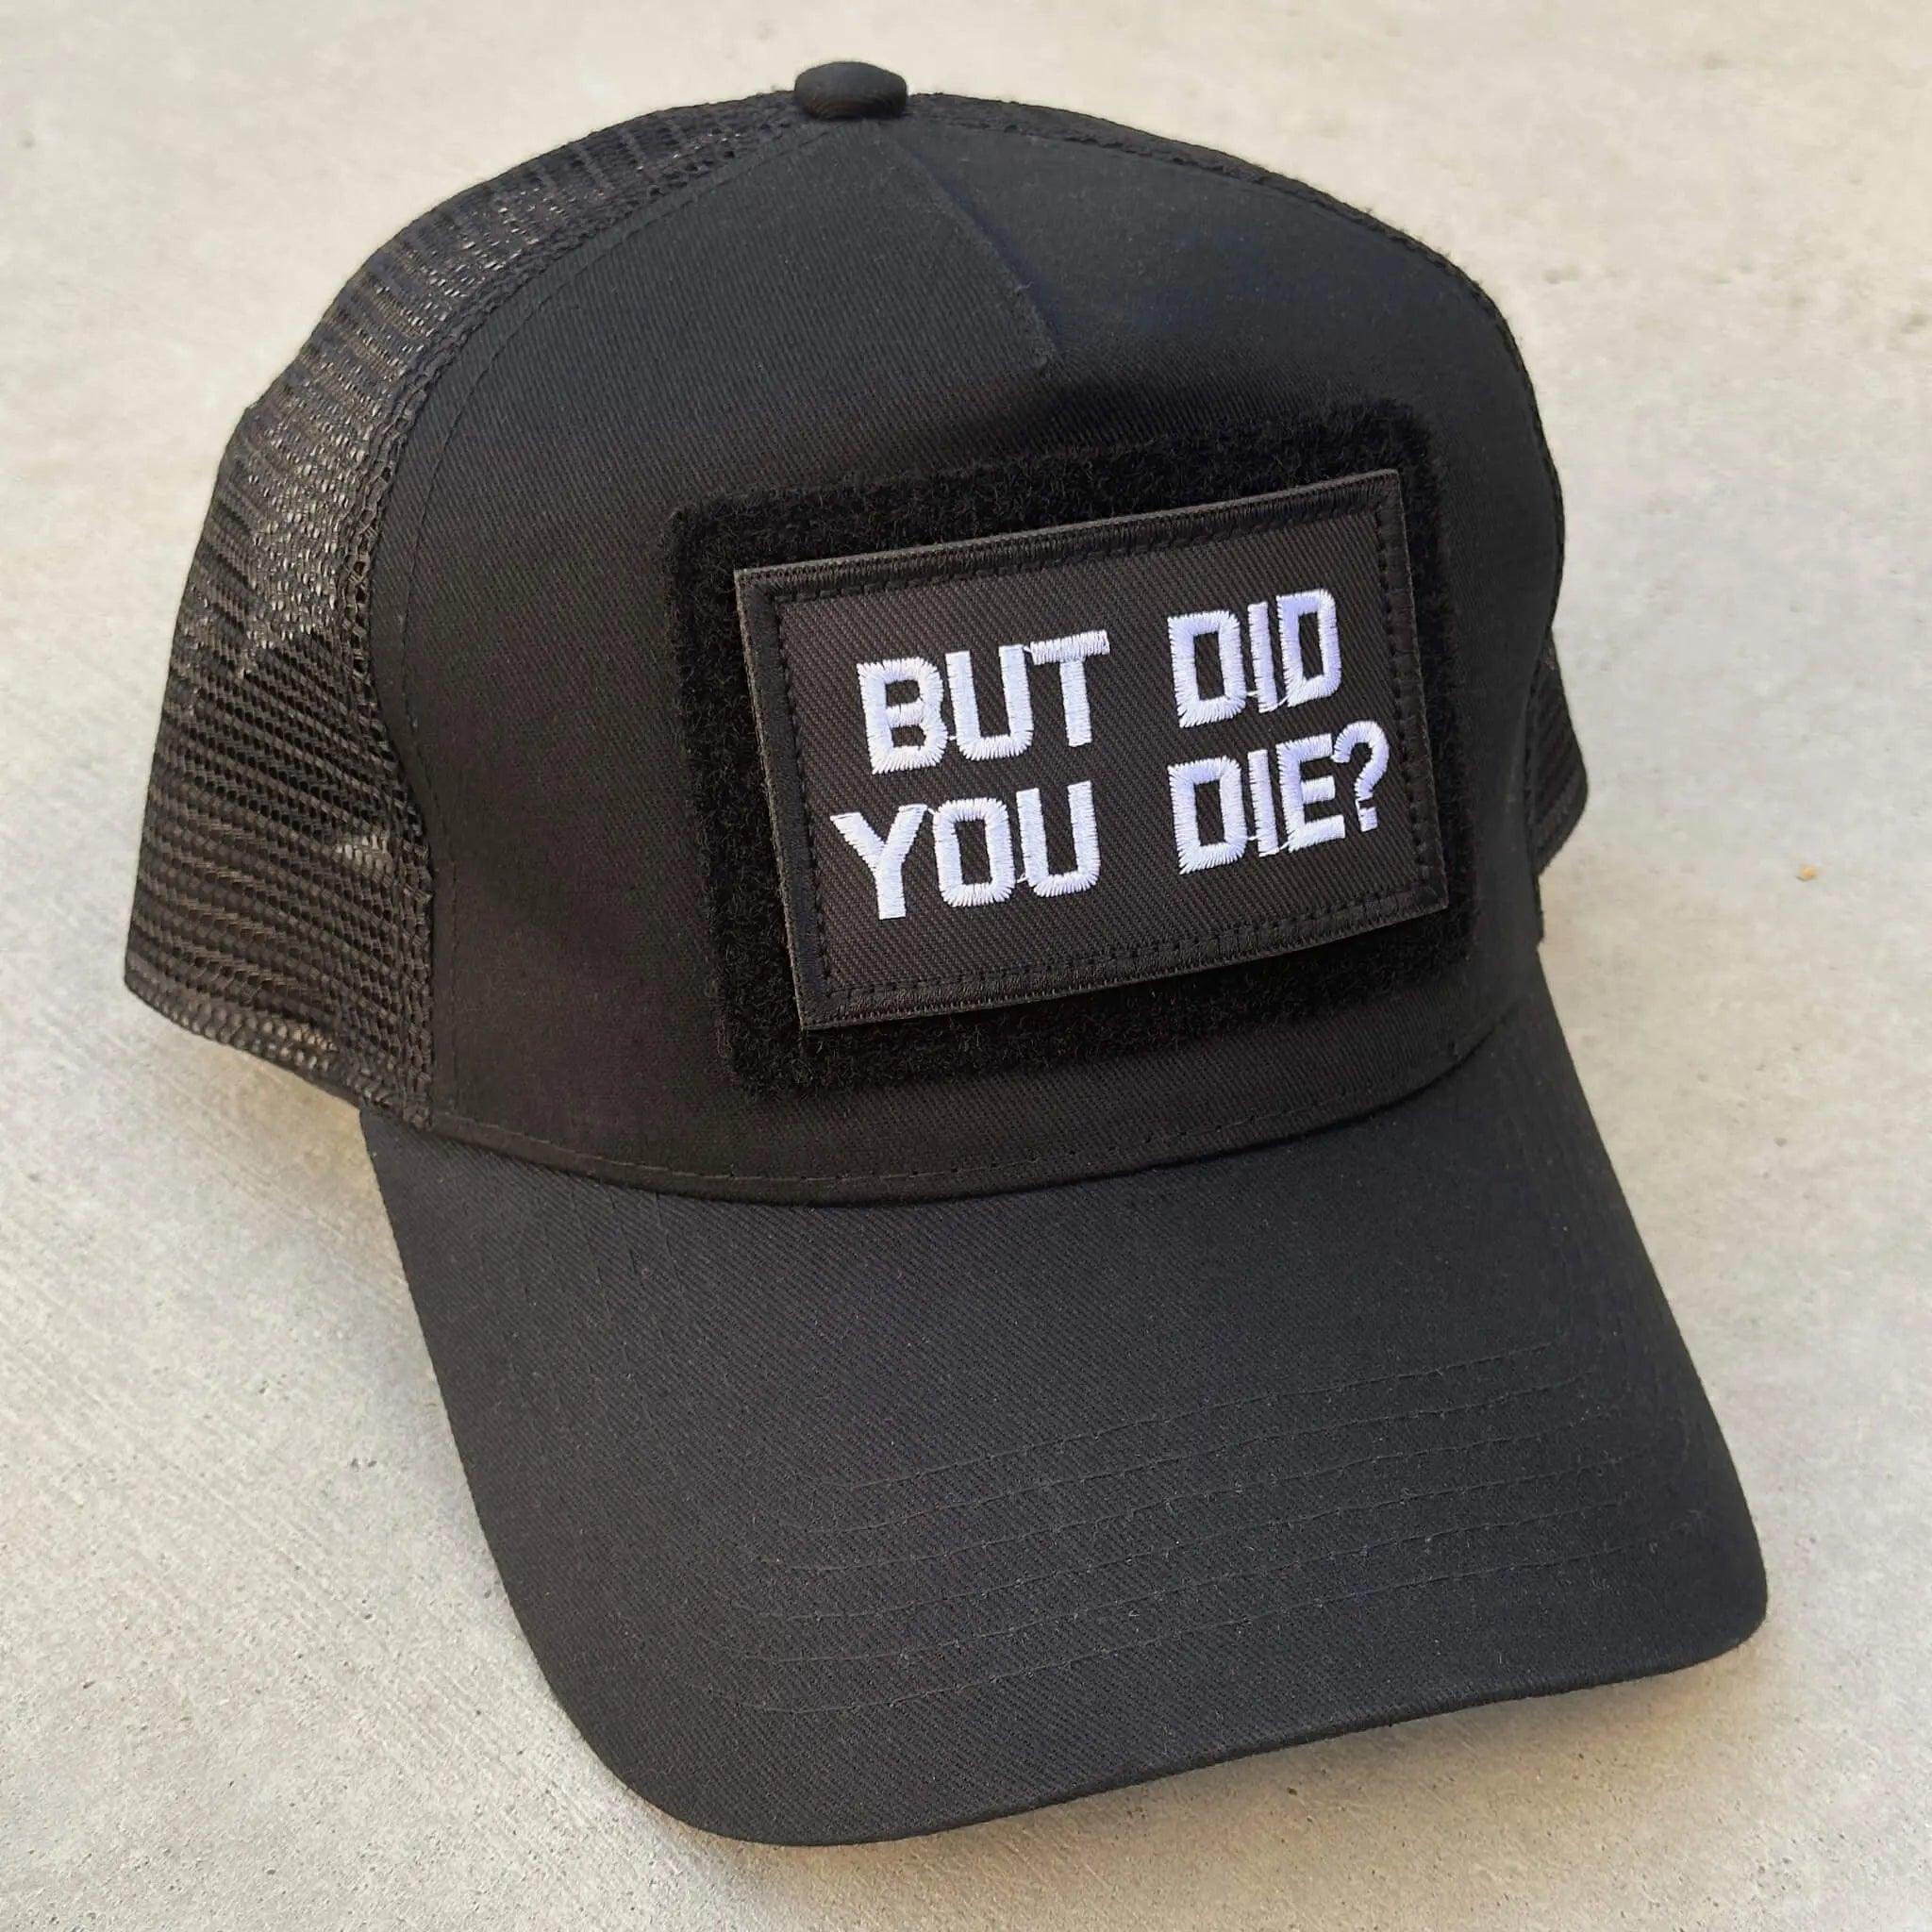 The trucker snapback cap in black with But Did You Die patch attached